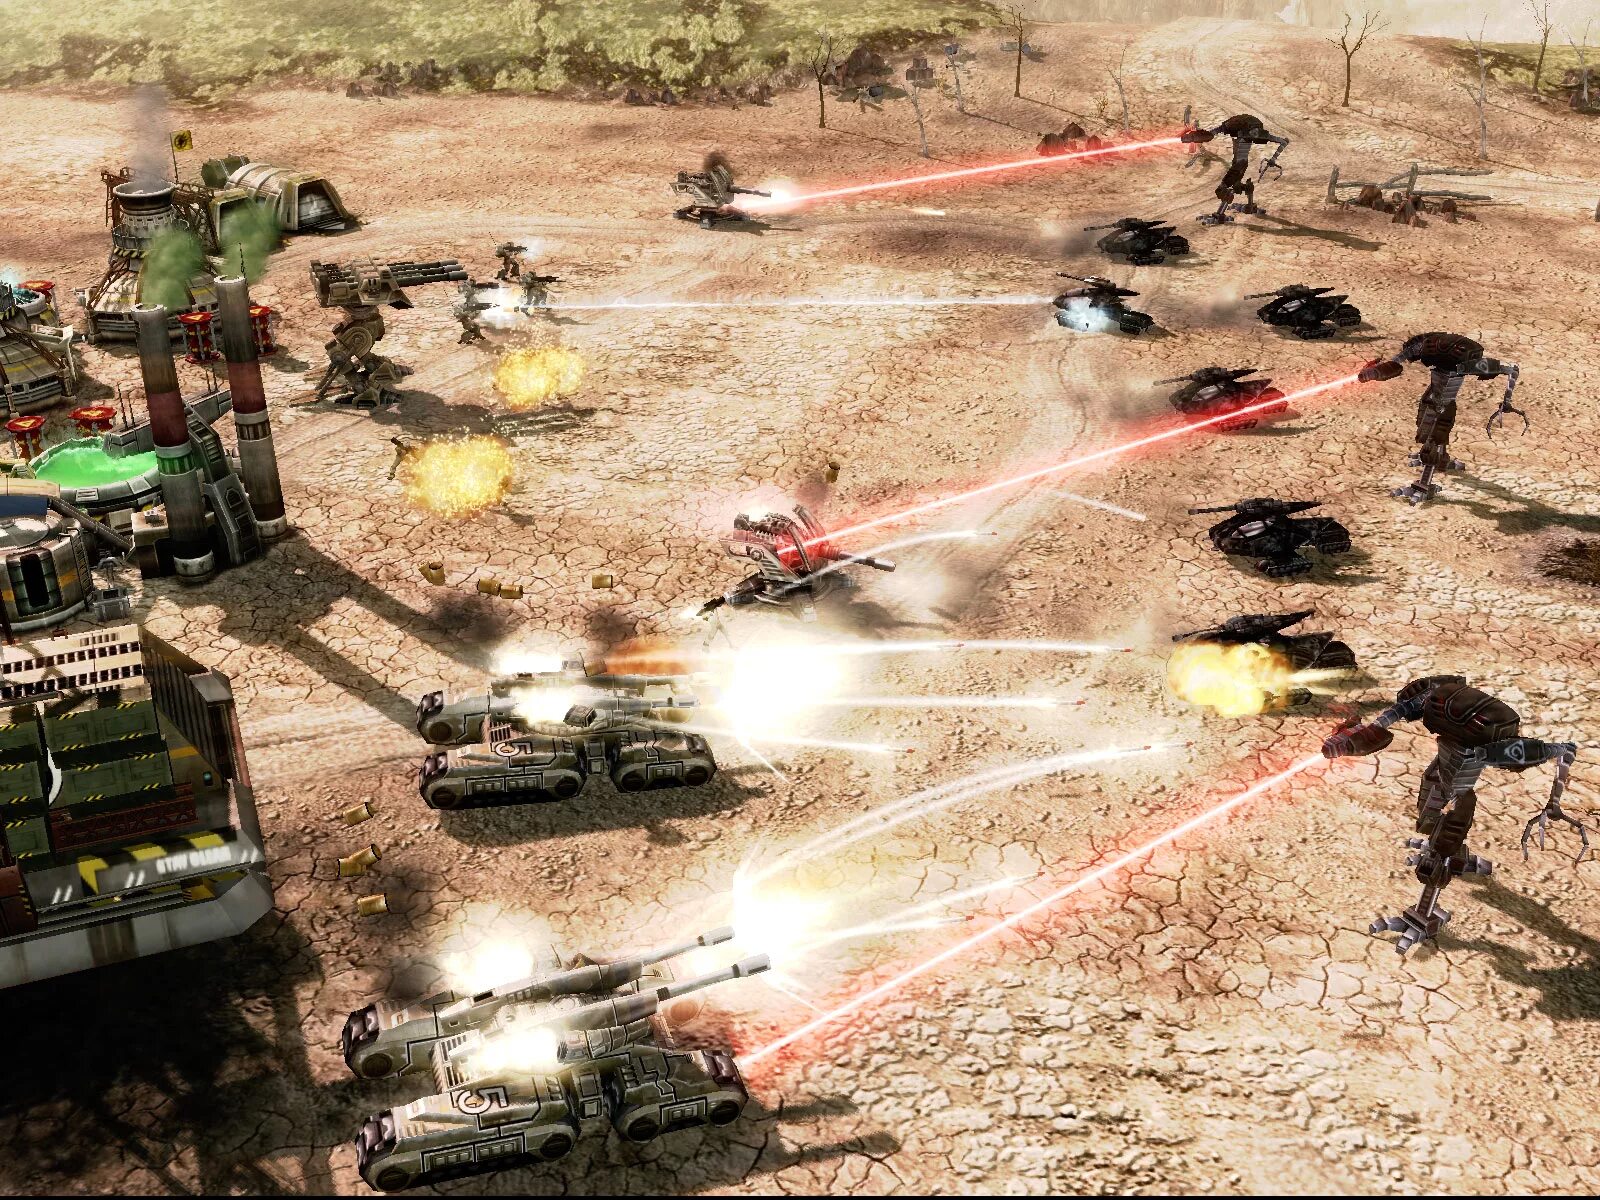 Command out. Command & Conquer 3: Tiberium Wars. Command and Conquer Tiberium Wars. CNC 3 Tiberium Wars. Commander Conquer 3 Tiberium Wars.